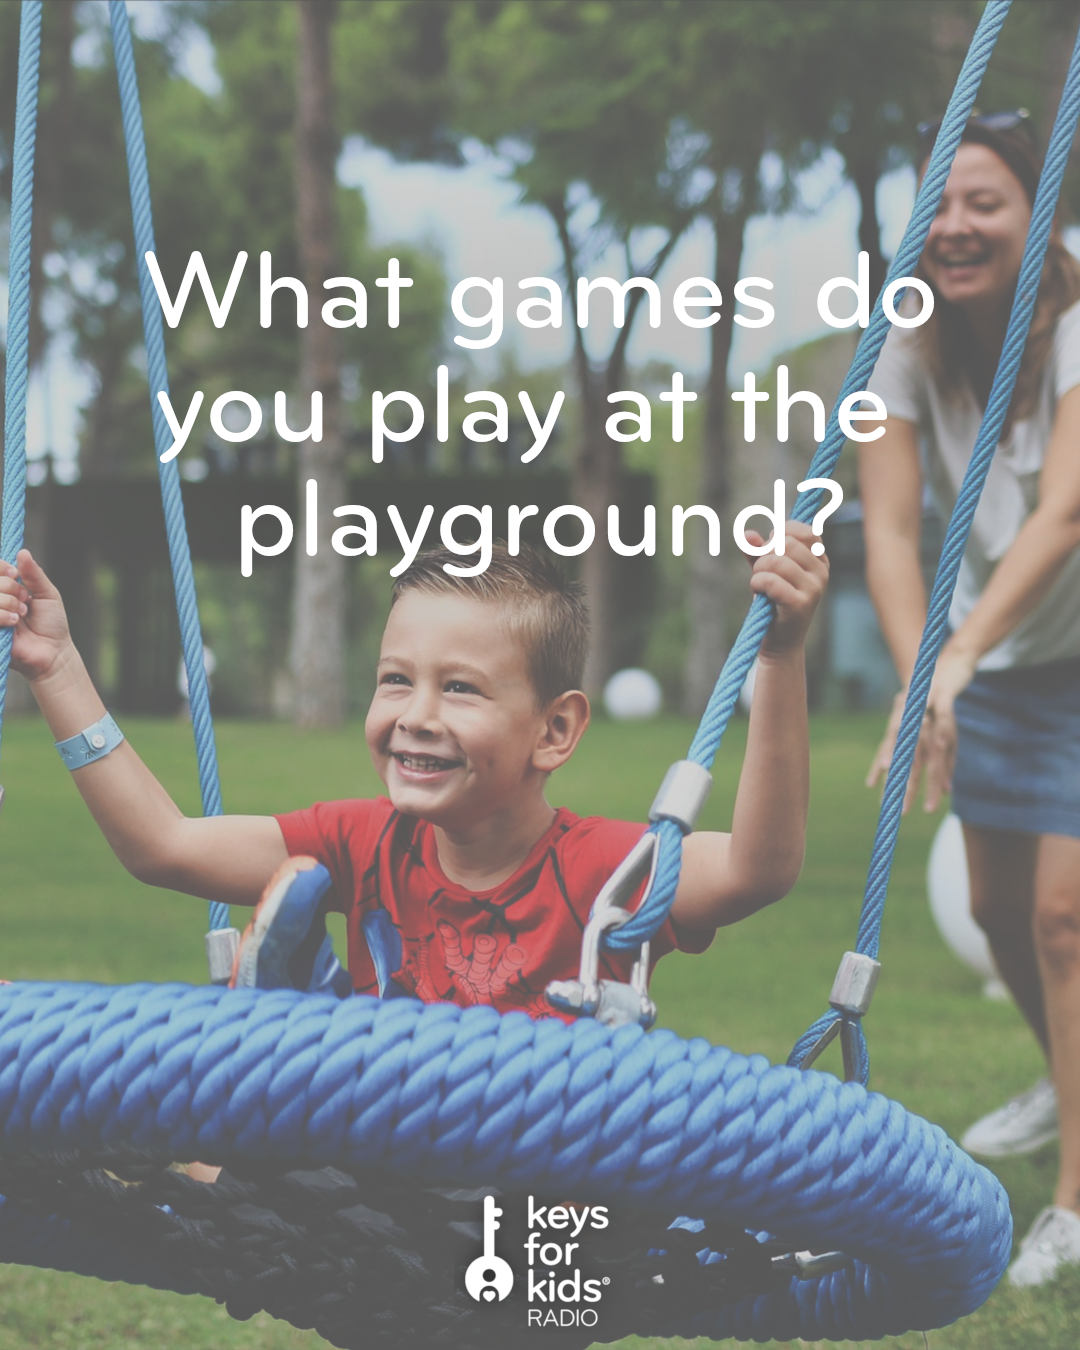 Games to Play at the Park